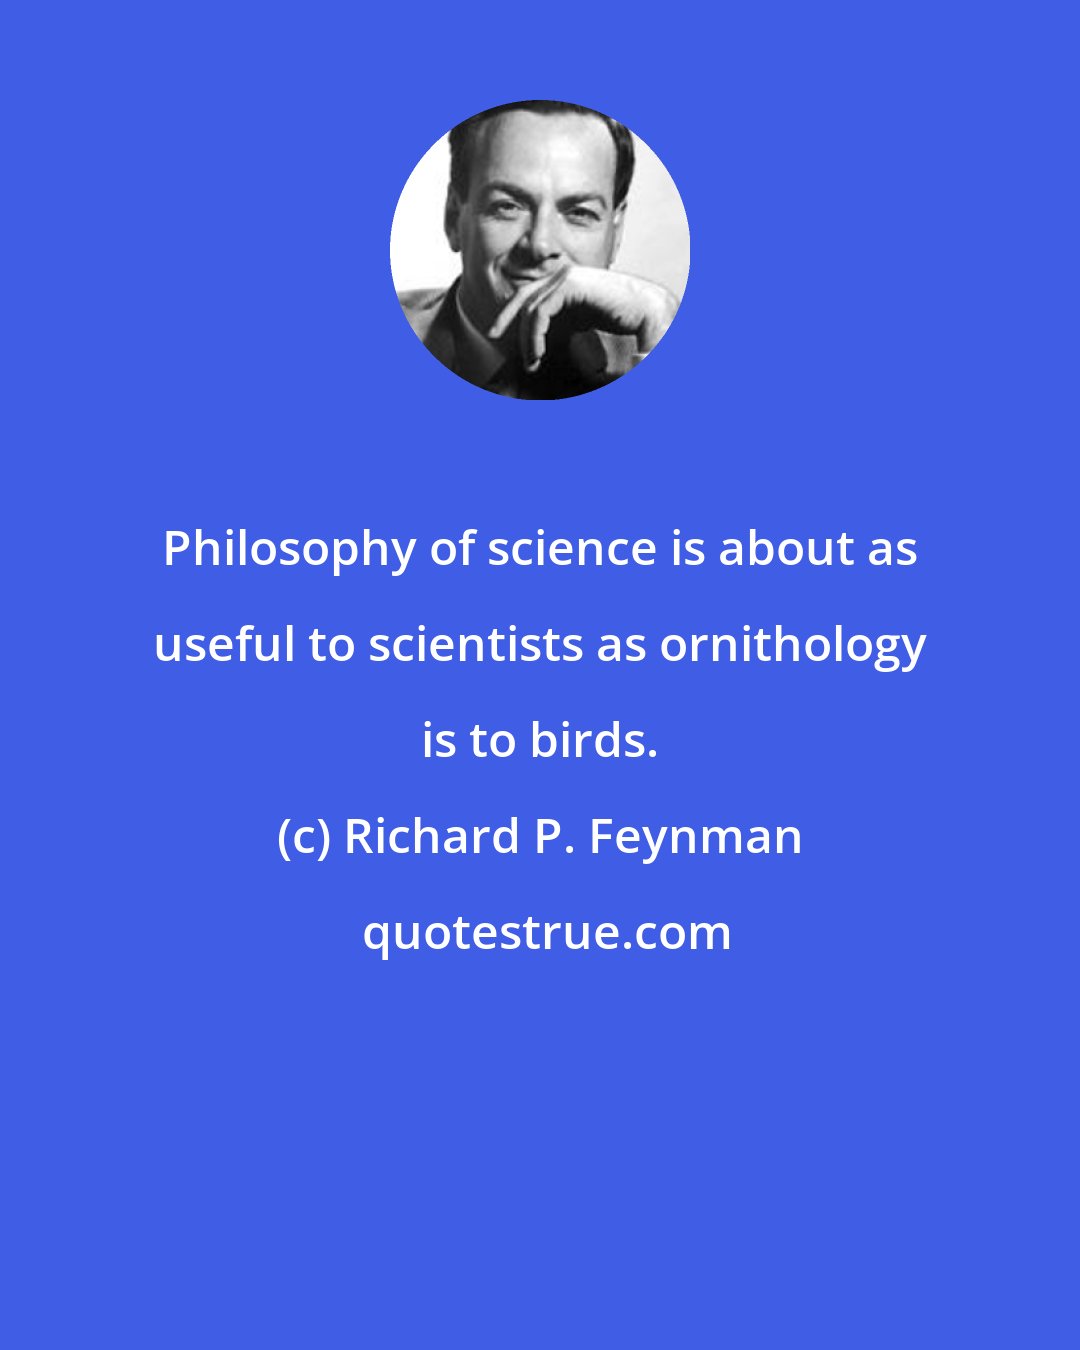 Richard P. Feynman: Philosophy of science is about as useful to scientists as ornithology is to birds.